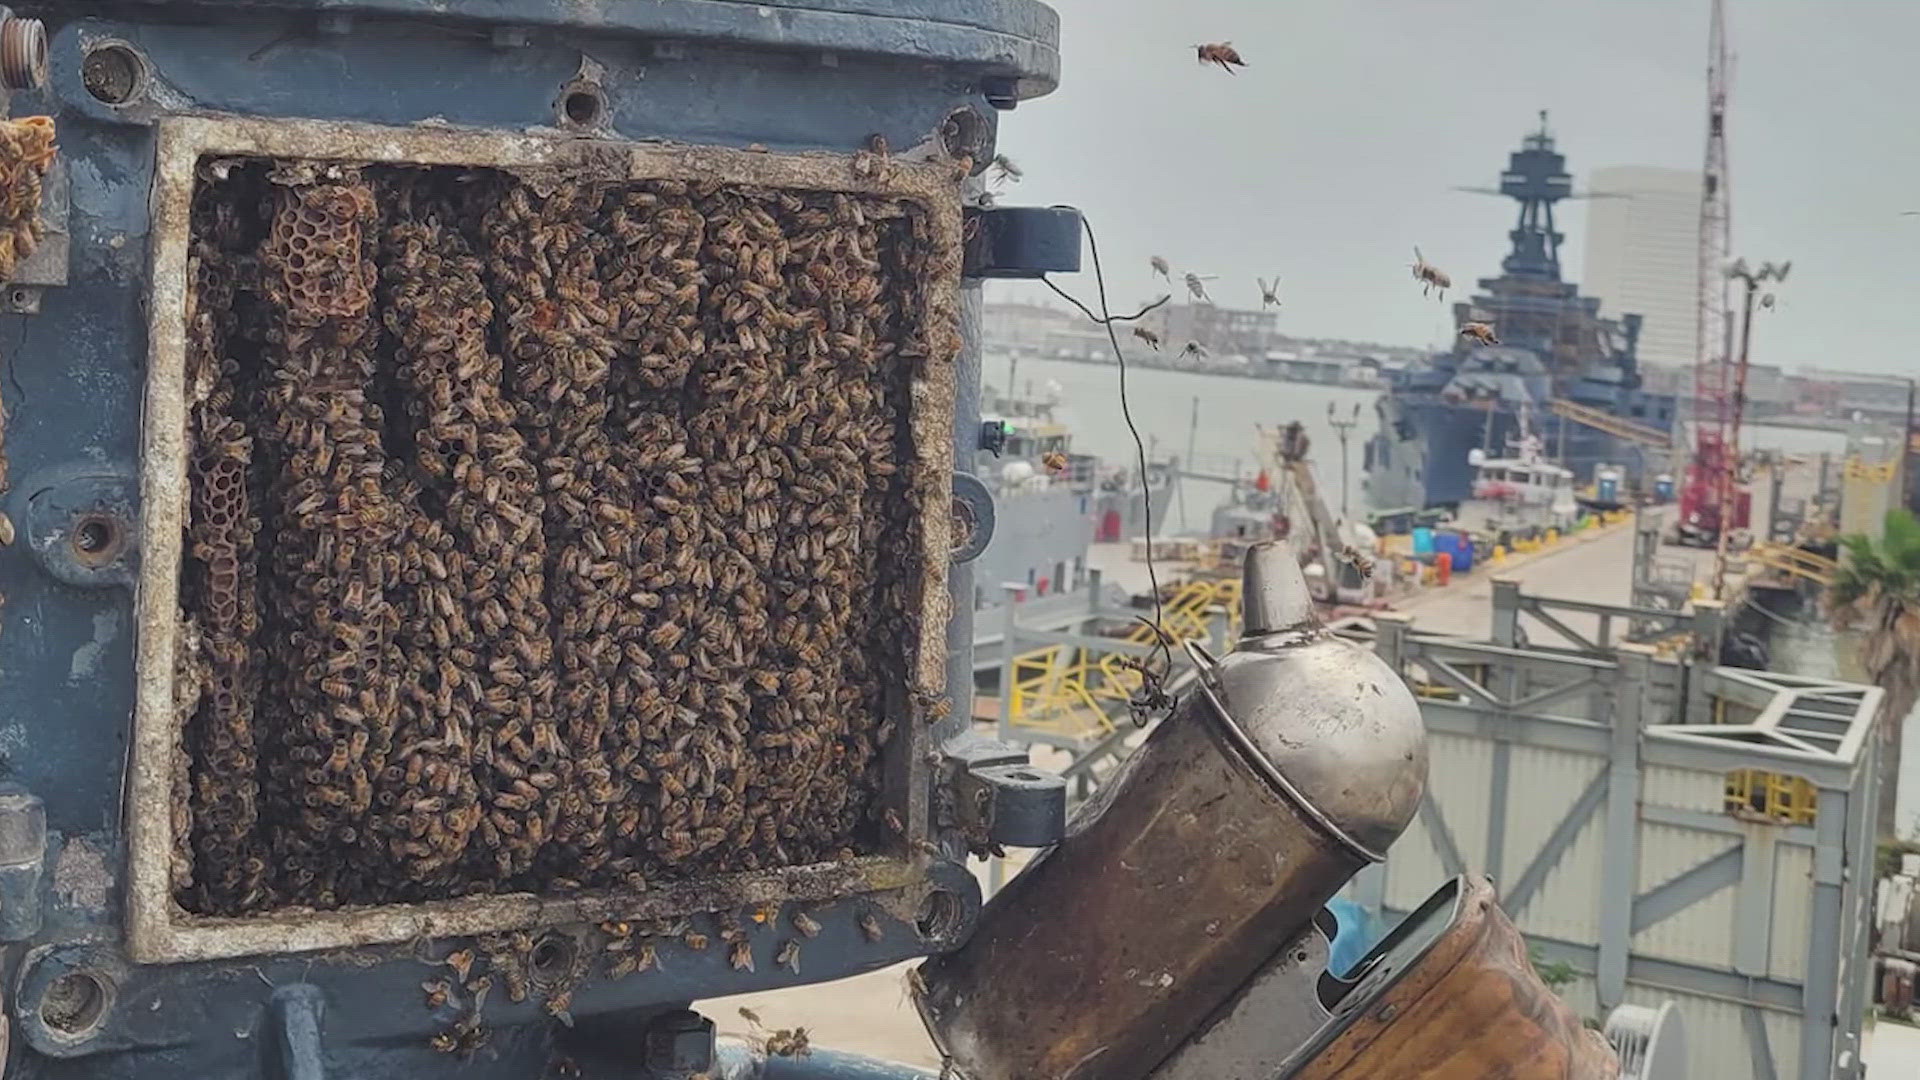 Two colonies of honeybees decided to make the WWII battleship their home. Experts found the queen and relocated both hives.